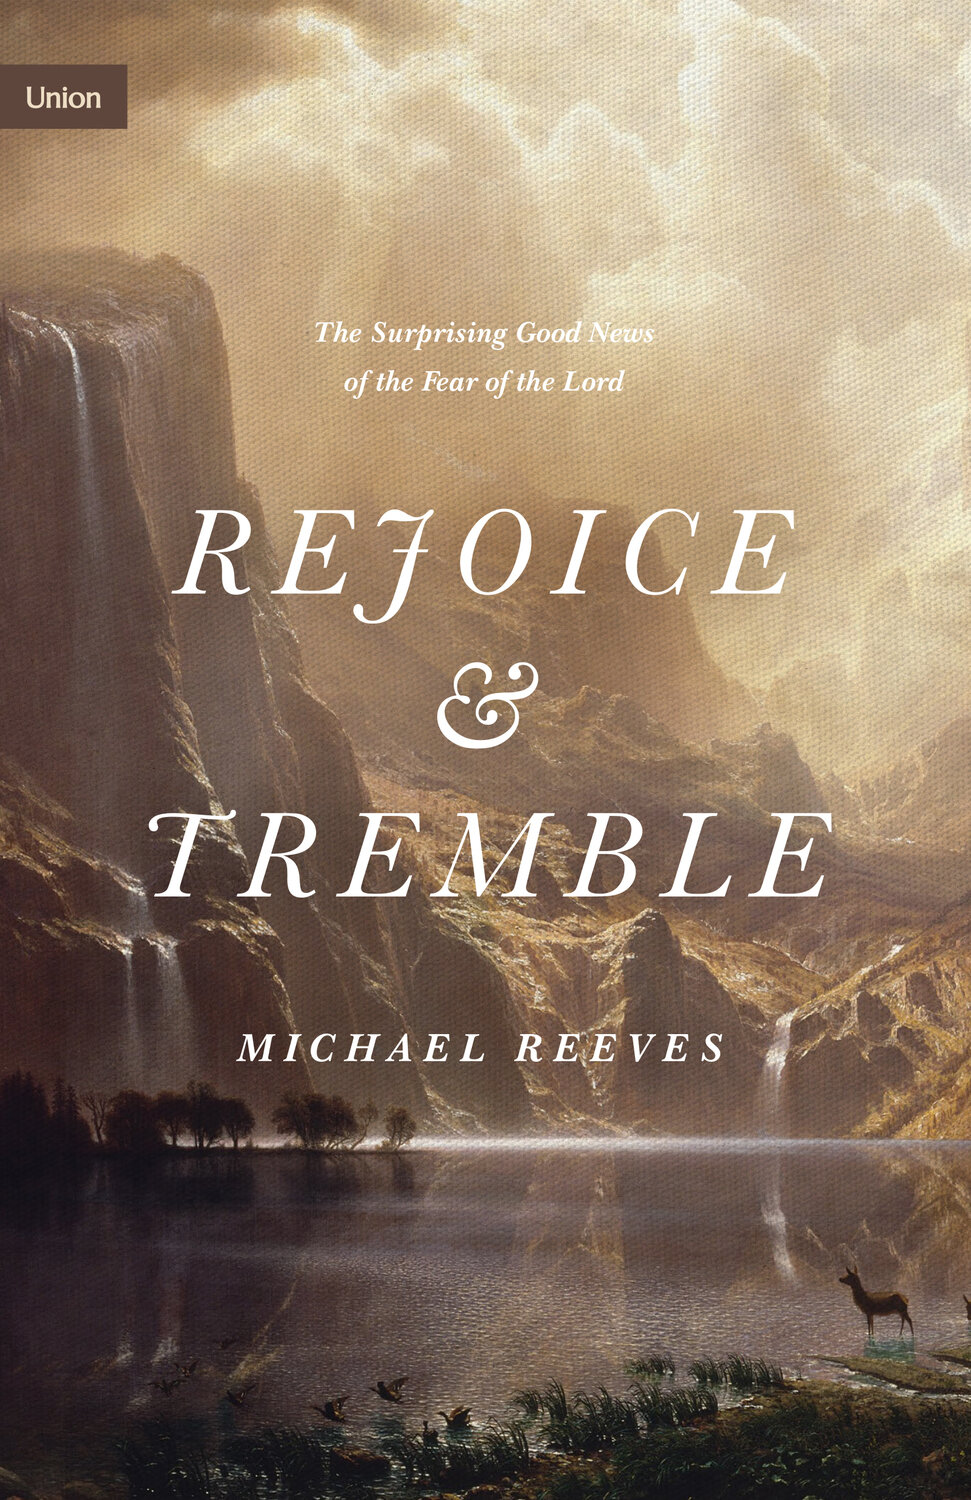 Rejoice and Tremble: The Surprising Good News of the Fear of the Lord (Union)